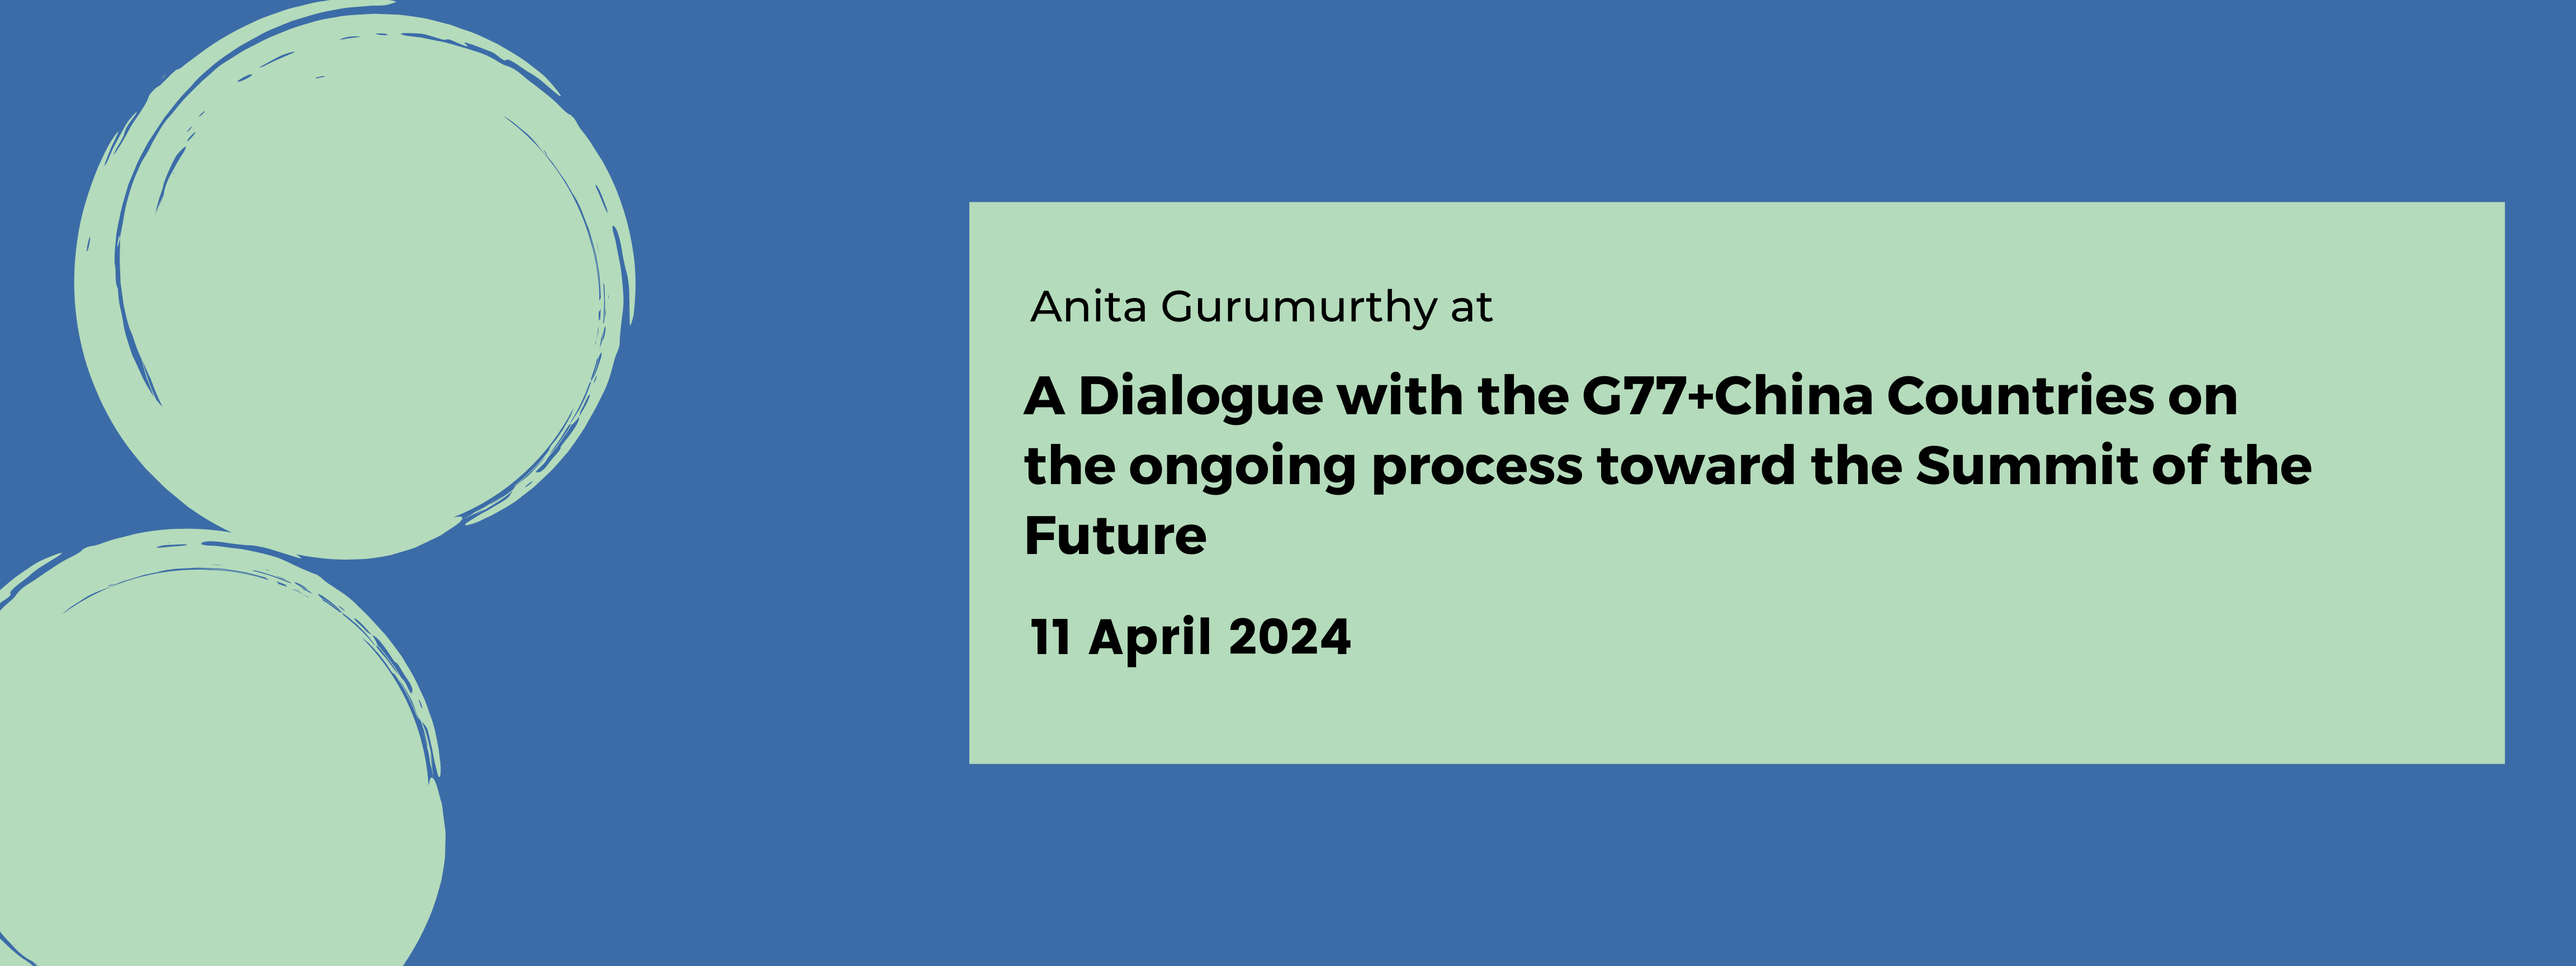 A Dialogue with the G77+China Countries  Summit of the Future: risk and opportunities for developing countries banner